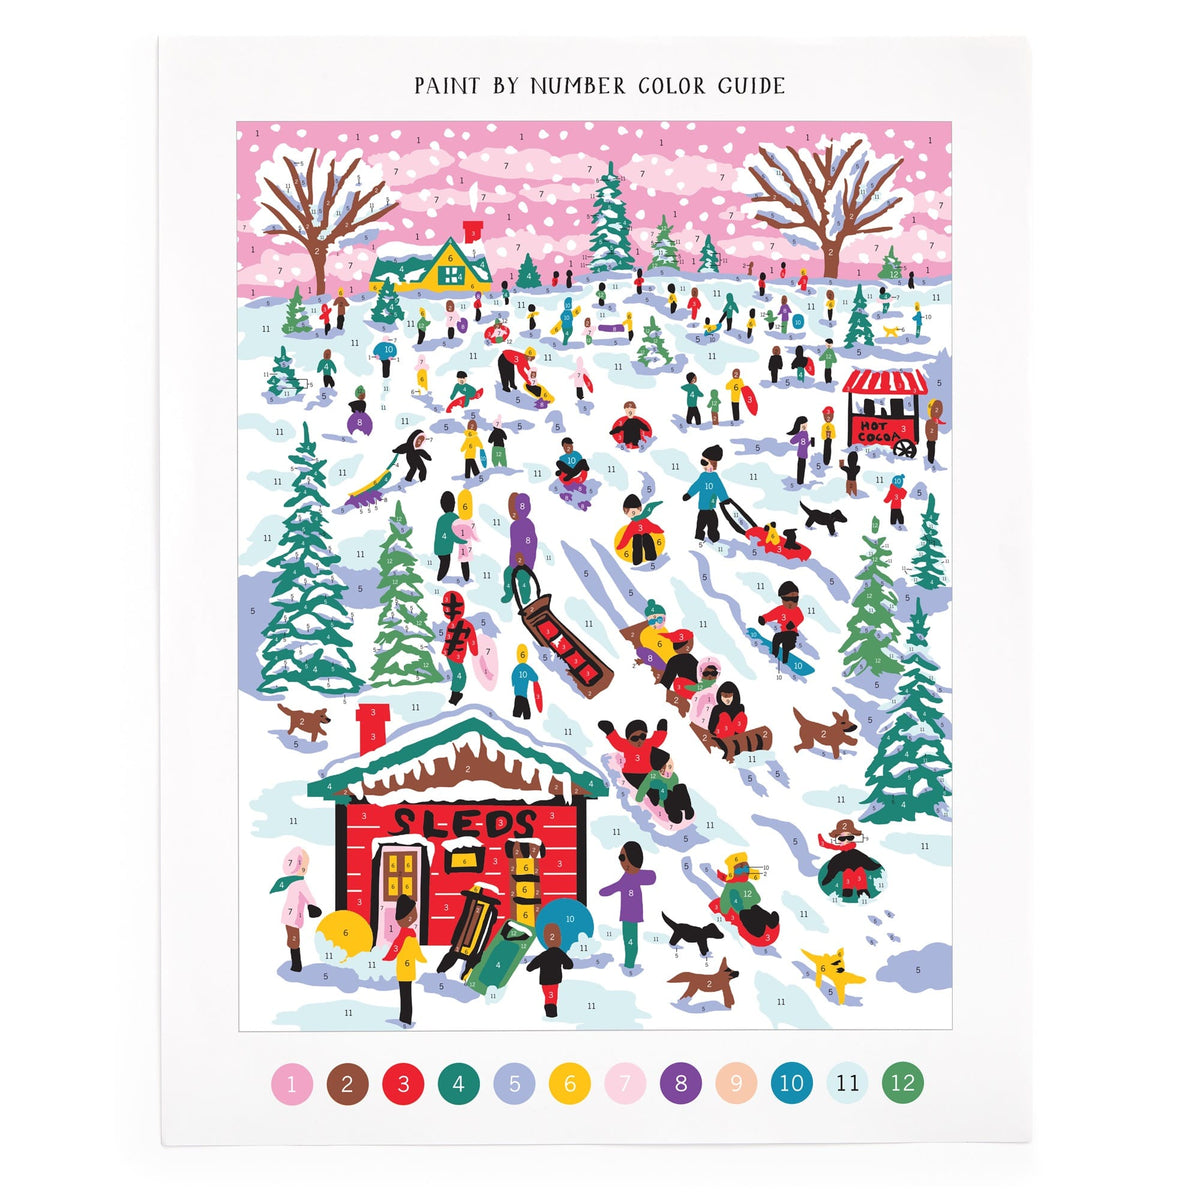 Michael Storrings Snow Day 11x14 Paint by Number Kit Paint By Number Kits Michael Storrings 